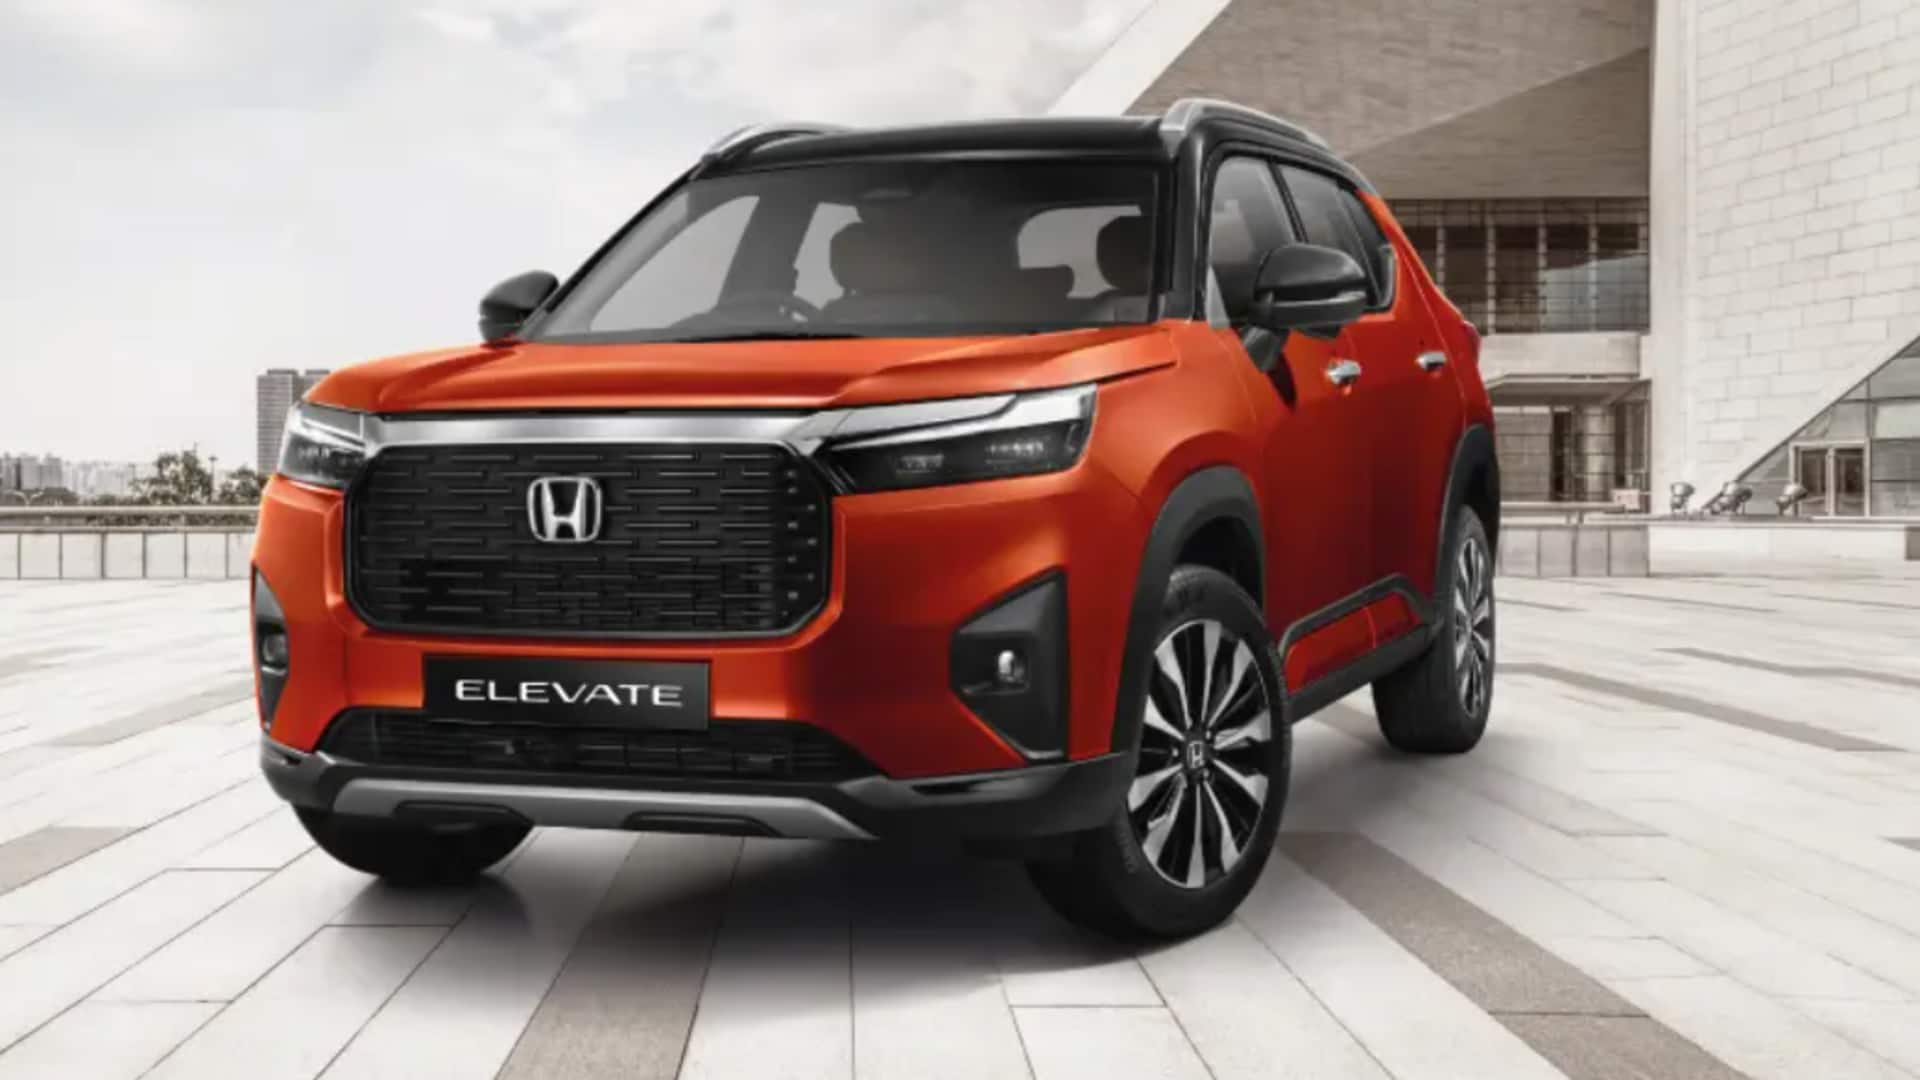 Honda's ACE project to develop an Elevate-based global electric SUV